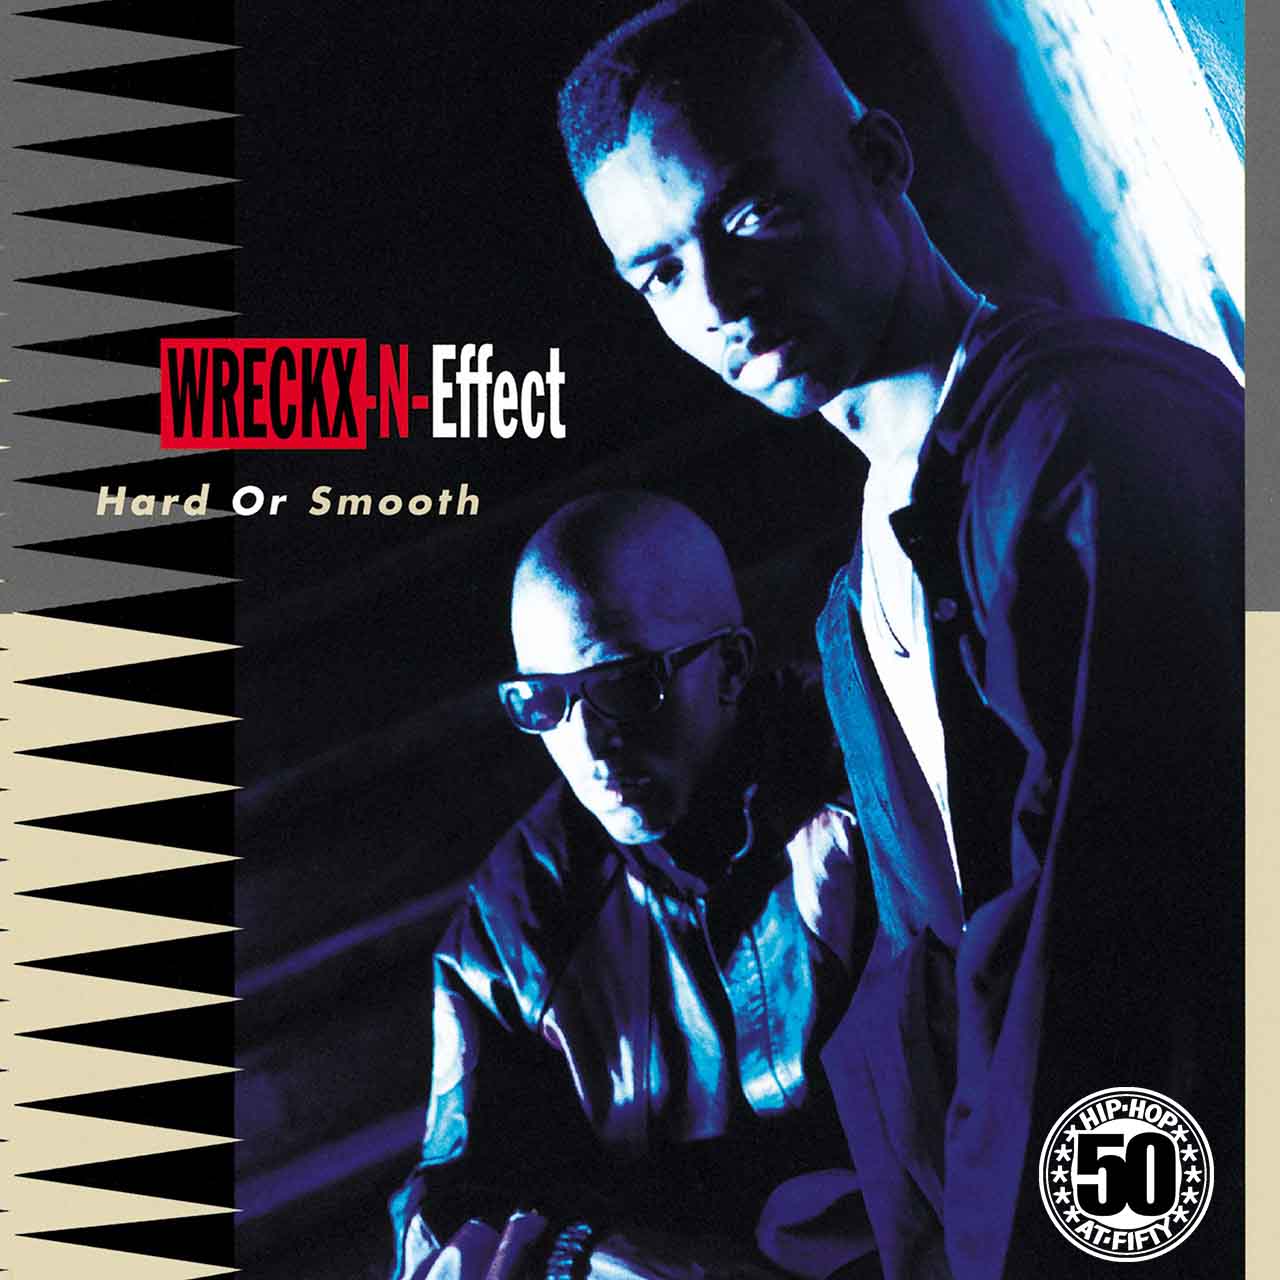 ‘Hard Or Smooth’: Wreckx-n-Effect’s New Jack Swing Classic